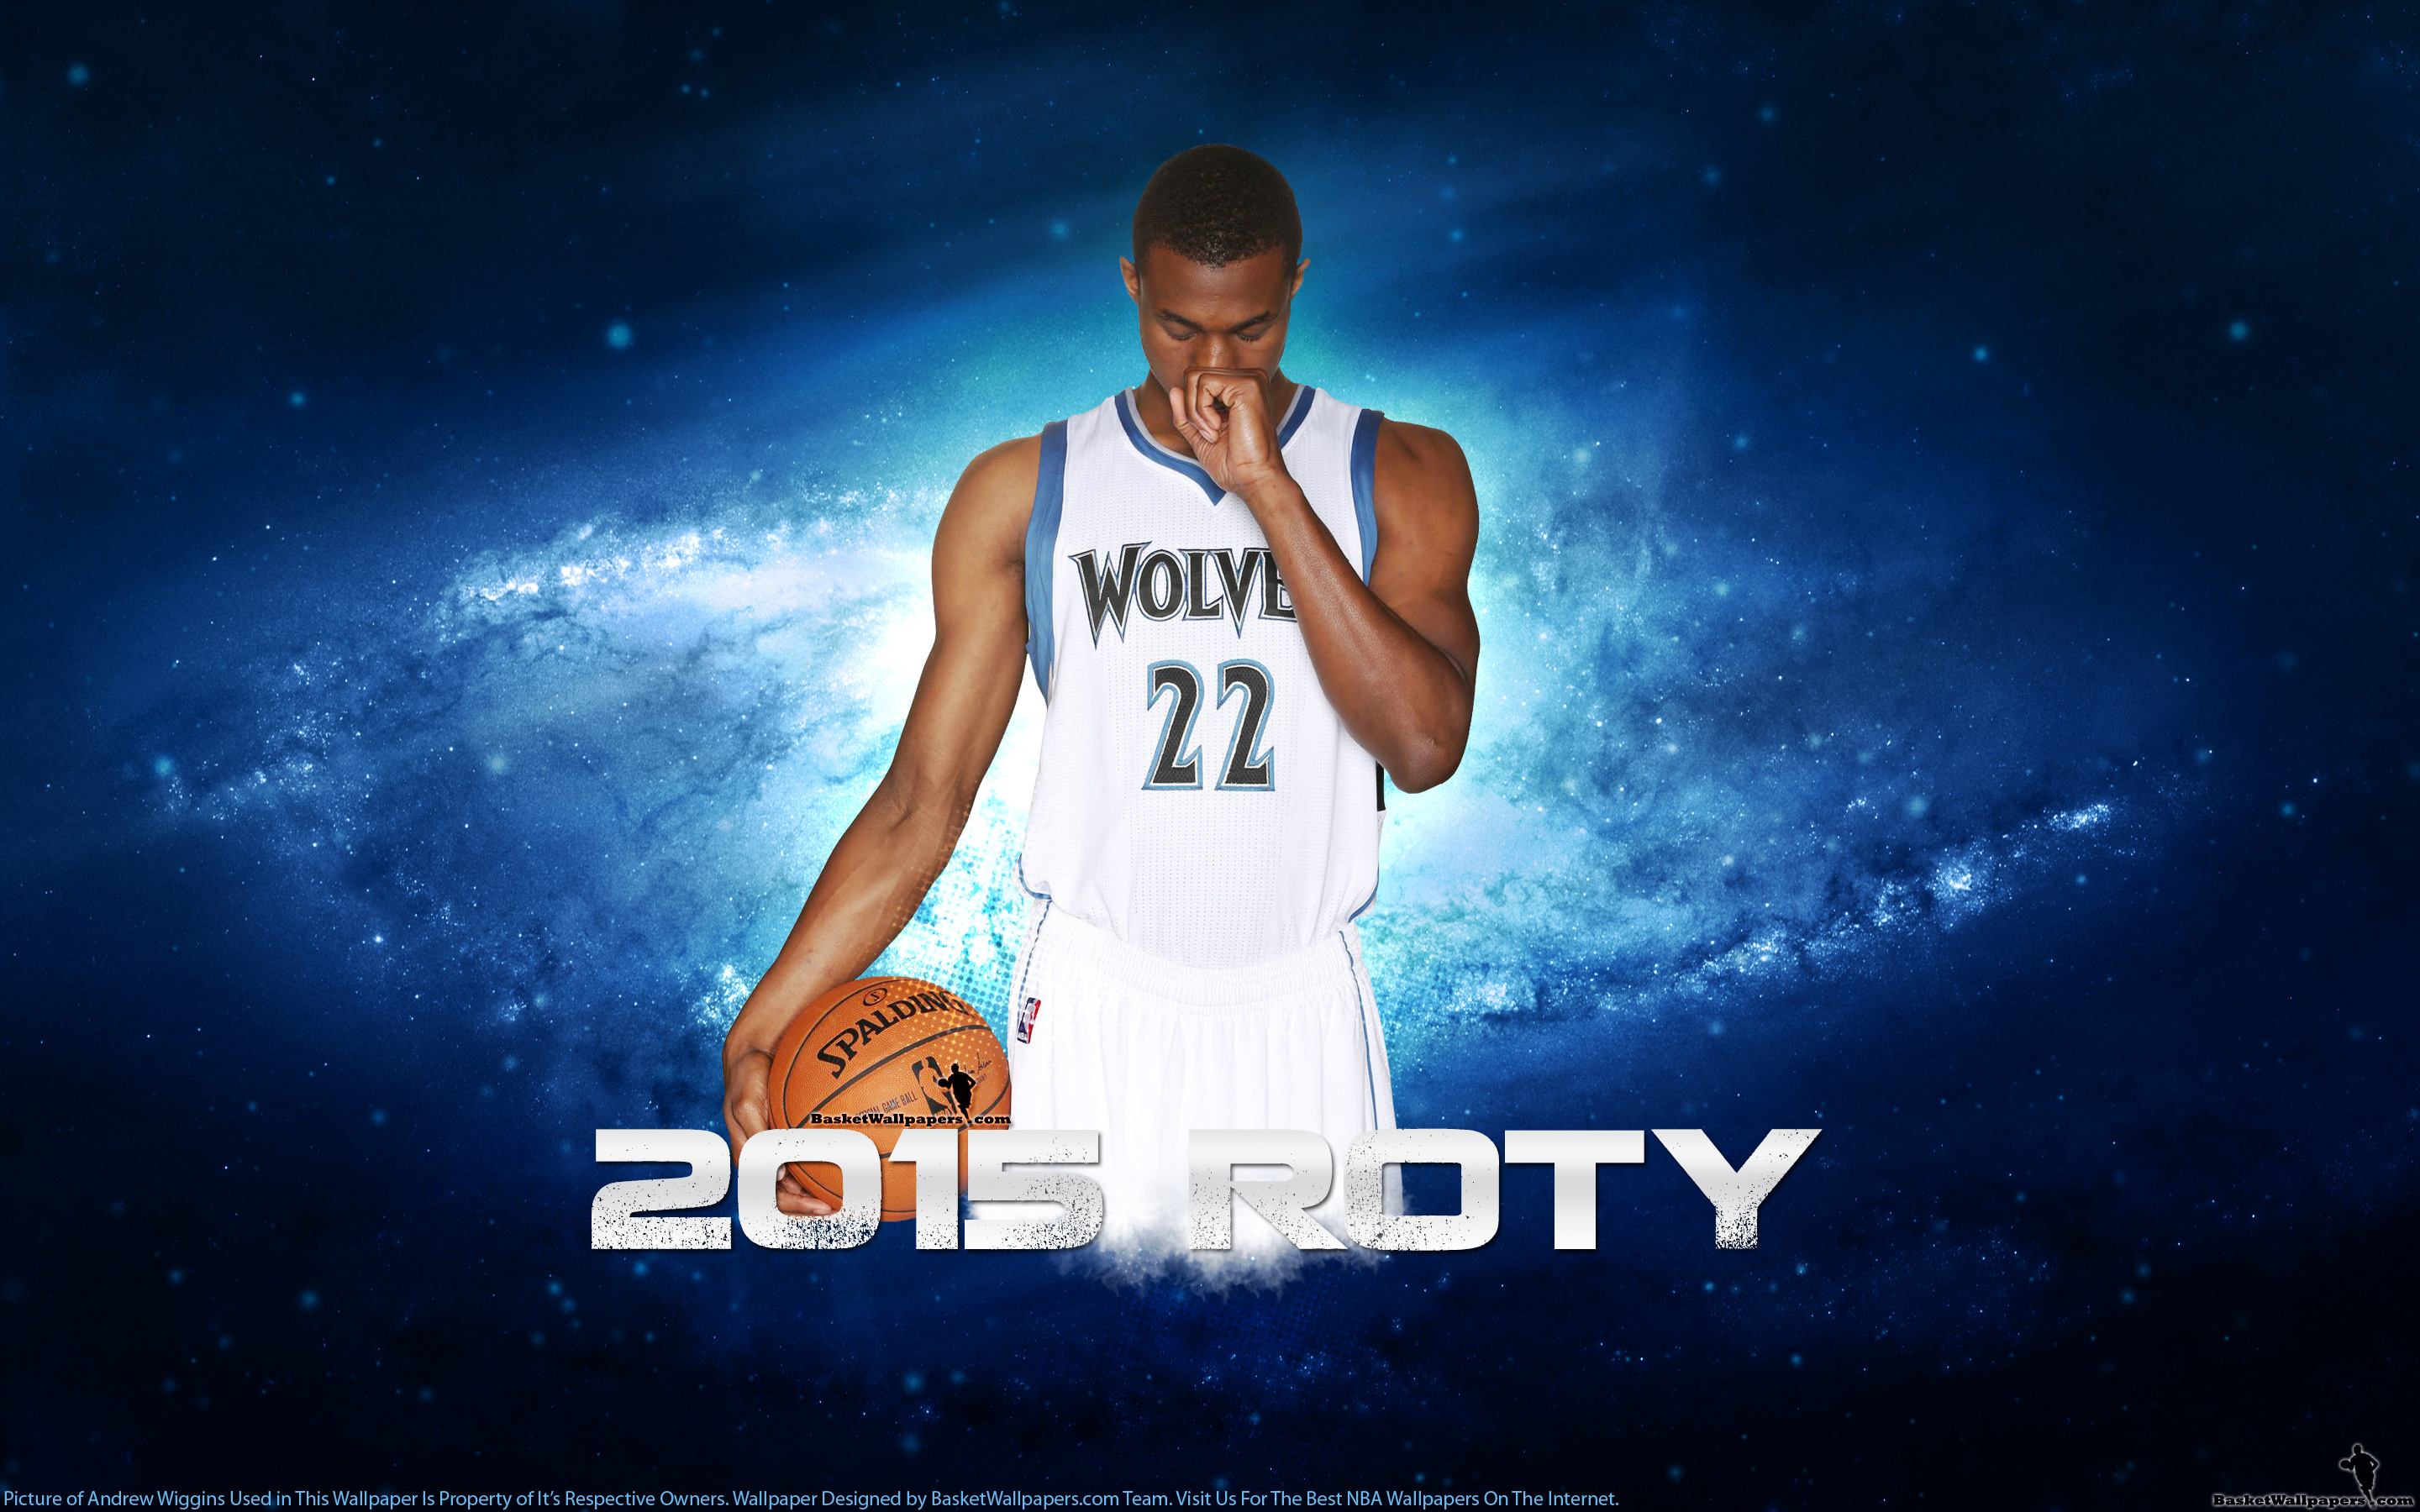 Andrew Wiggins Cavs First Pick 2014 Wallpaper  Basketball Wallpapers at